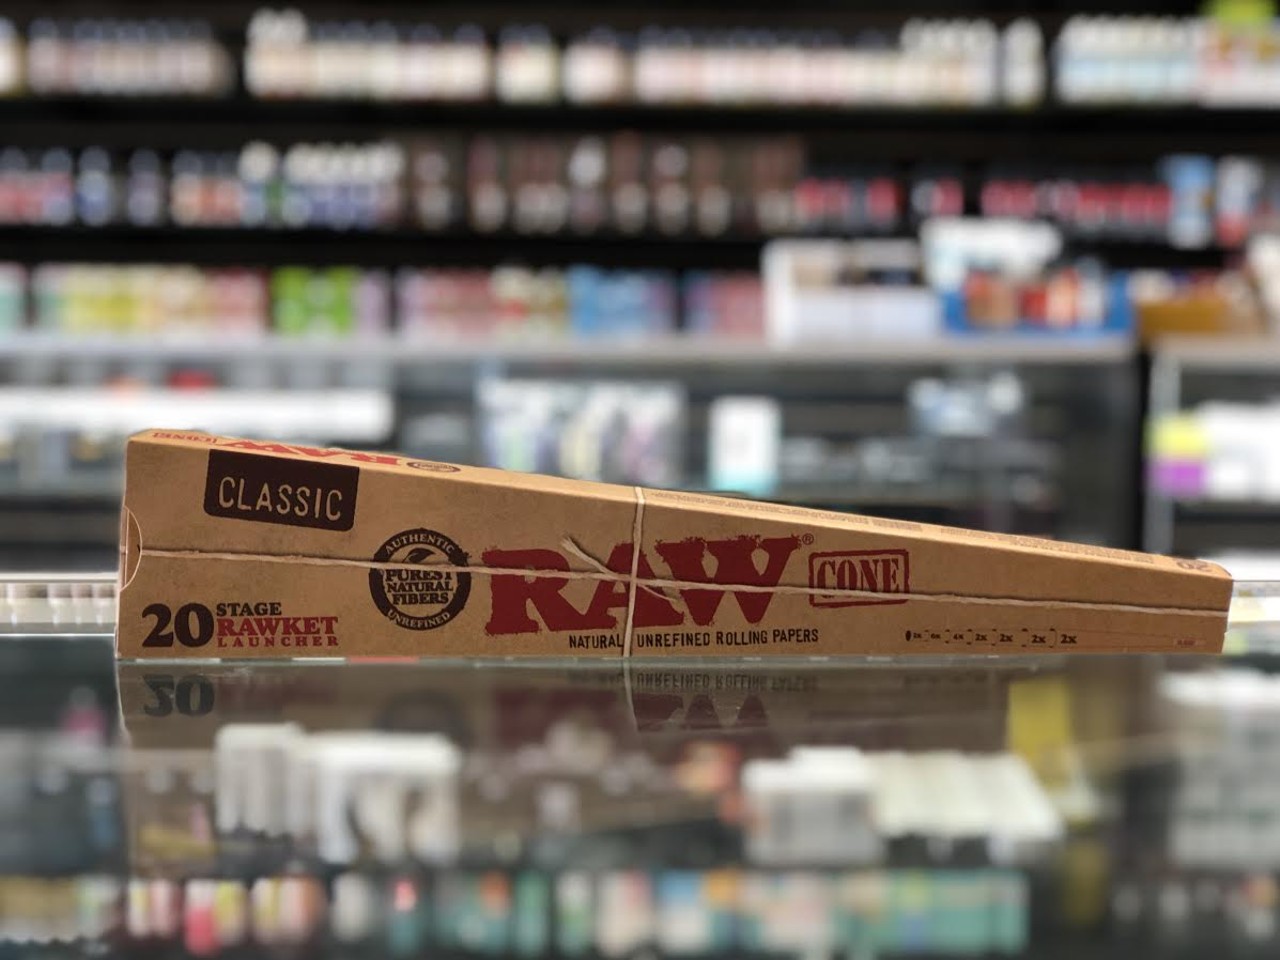 RAW 20 stage RAWket Launcher, 20 cones, seven sizes, $15
Detroit Smoke and Vape
4718 Anthony Wayne Dr., unite 48201, Detroit; 313-462-8143
For the people pleaser: A great choice for anyone who struggles with joint-rolling and decision-making, the RAWket launcher pack includes 20 cones in seven different sizes including the ultimate party favor &#151; two supernatural foot-long cones. Not included: the five grams of herb you&#146;ll need to fill that bad boy. 
MT file photo.